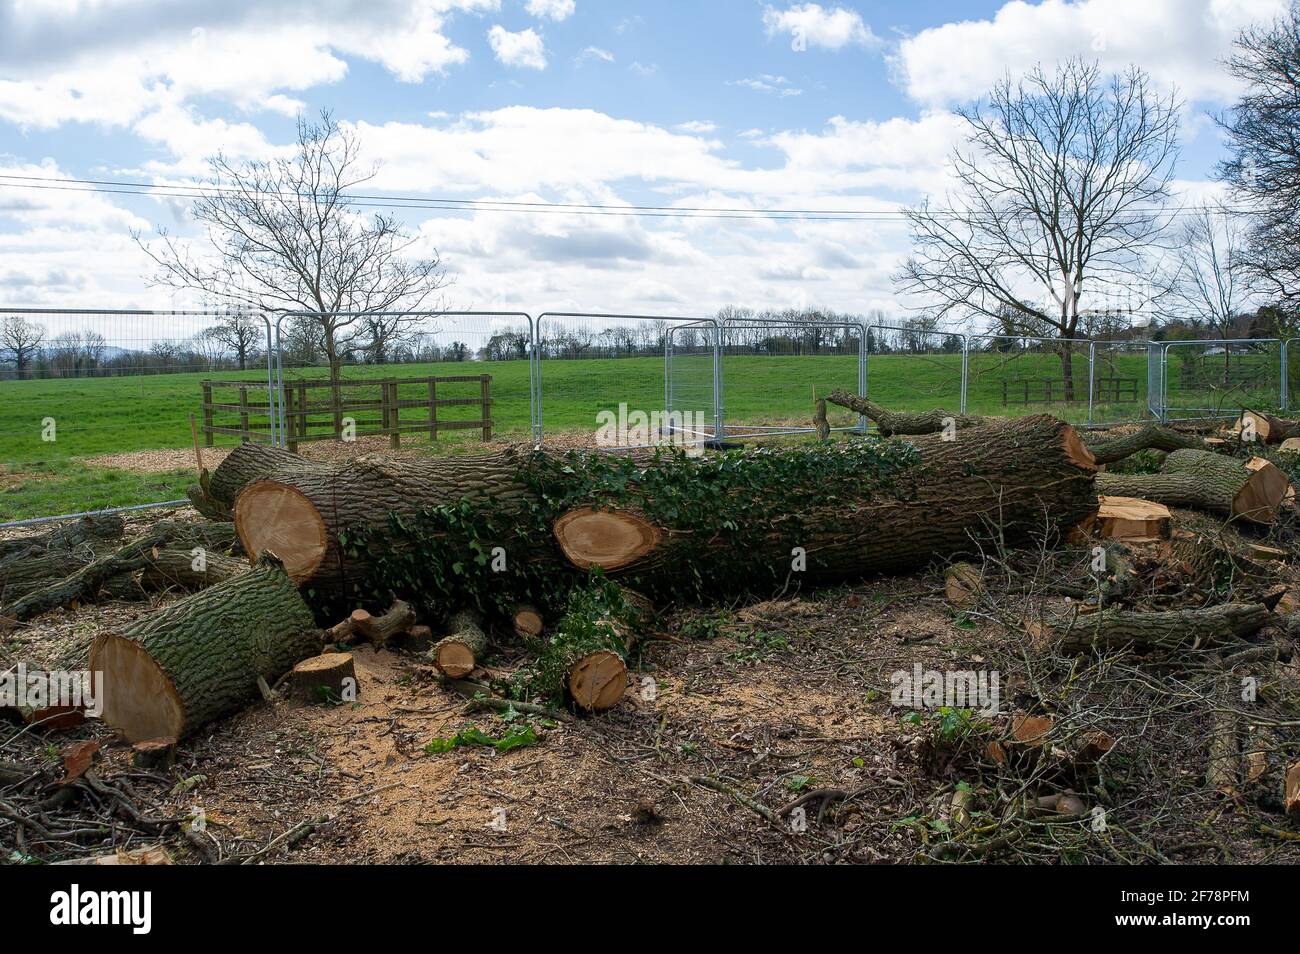 Aylesbury, UK. 5th April, 2021. HS2 Ltd have just felled yet another huge oak tree during the bird nesting season causing much upset to locals and environmentalists. The very controversial and over budget High Speed 2 rail link from London to Birmingham is carving a huge scar across the Chilterns which is an AONB and puts 108 ancient woodlands, 693 wildlife sites and 33 SSSIs at risk. Credit: Maureen McLean/Alamy Stock Photo